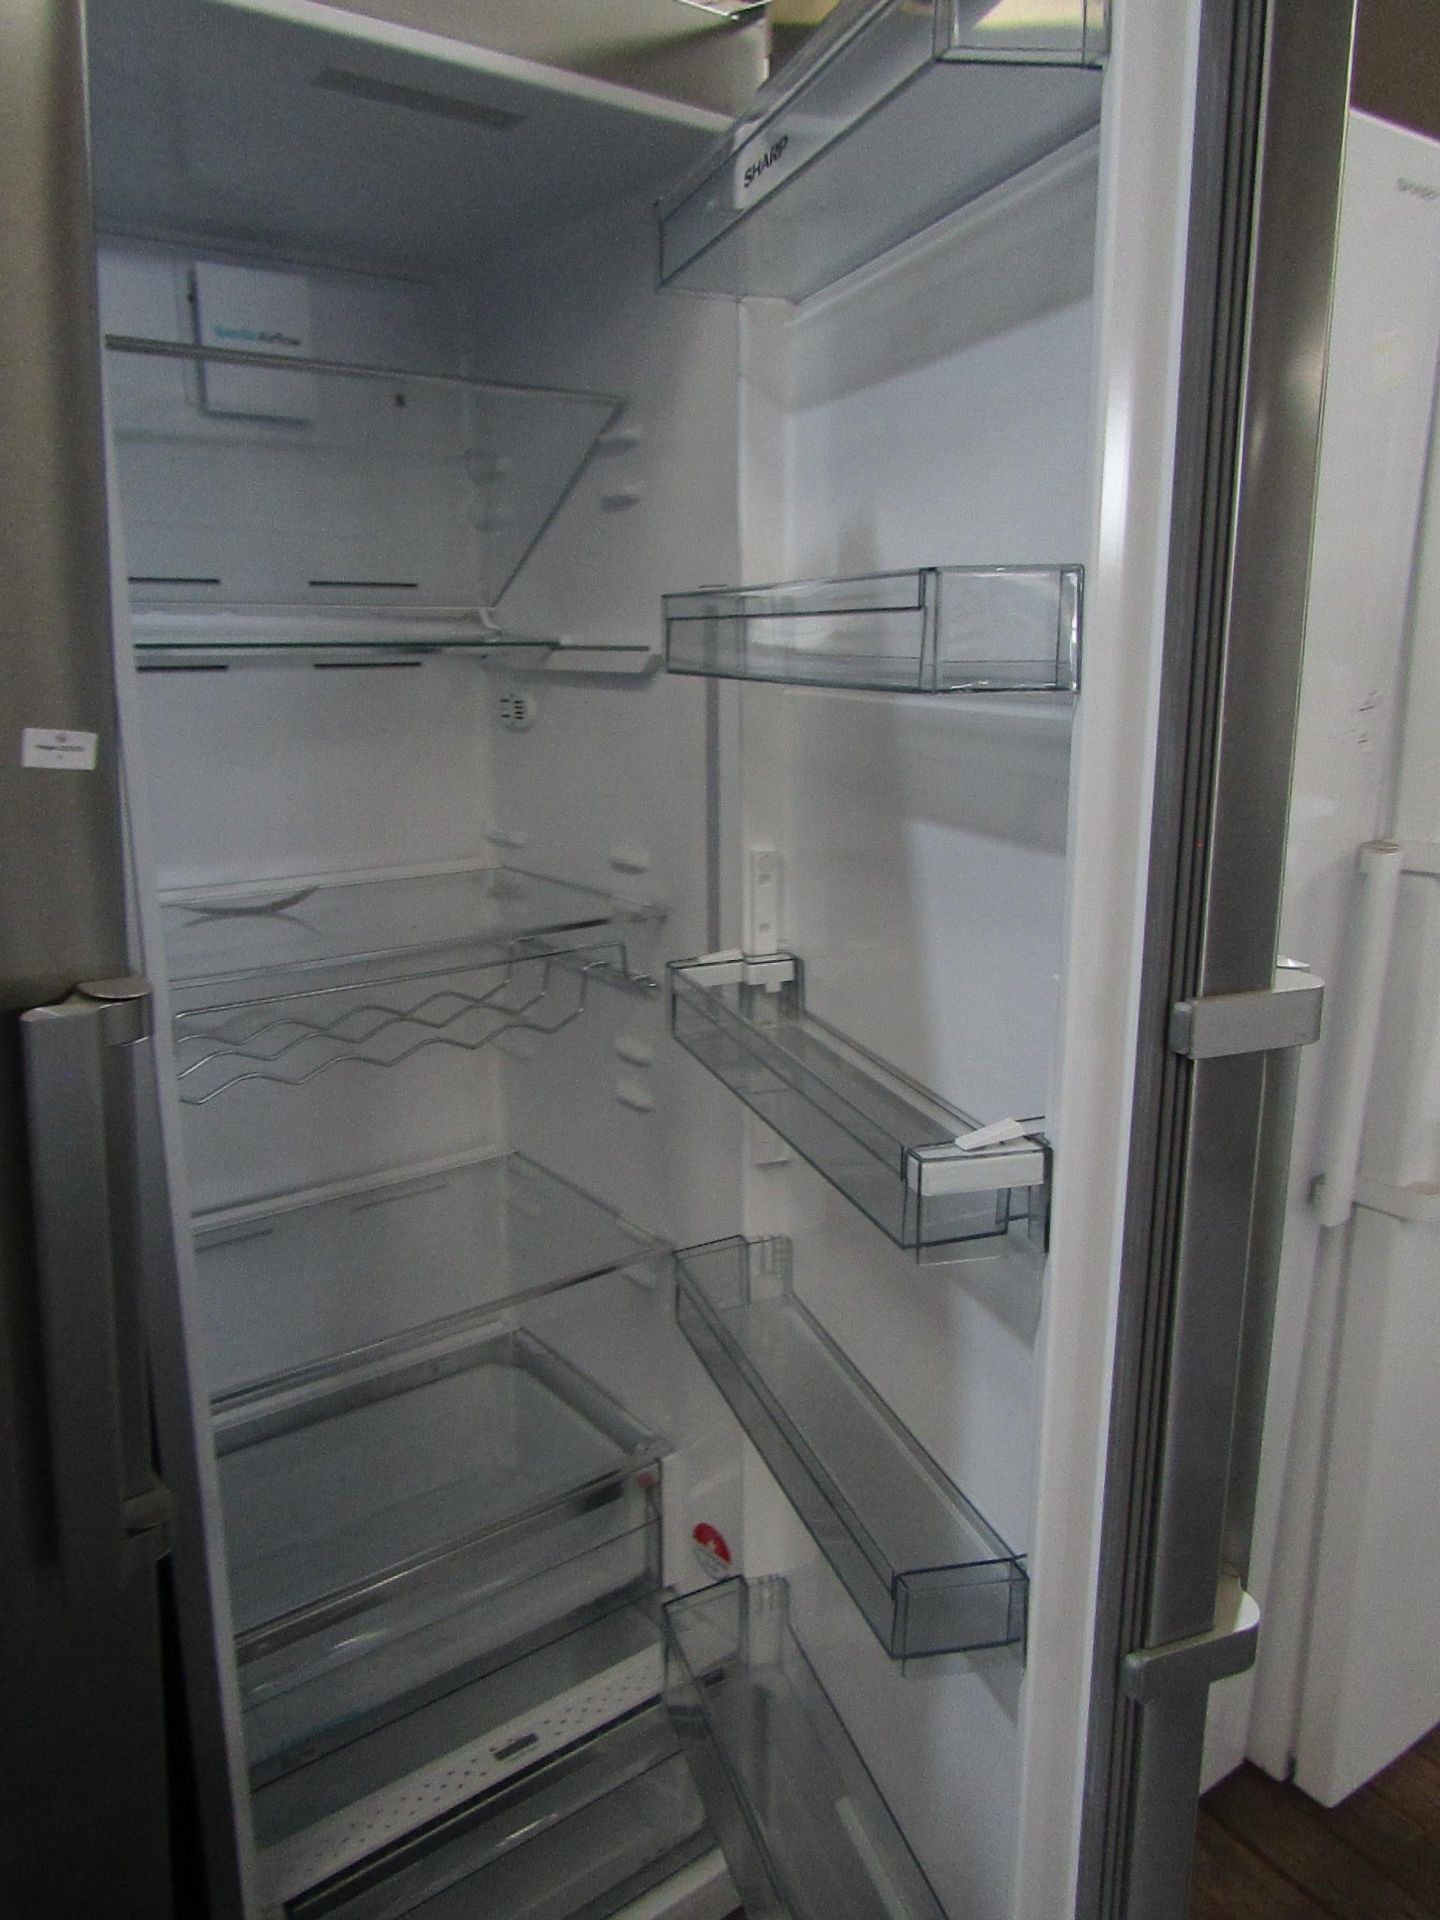 Sharp - Tall Stainless Steel Freestanding Fridge - Unable To Test Due to room temperature being - Image 2 of 2